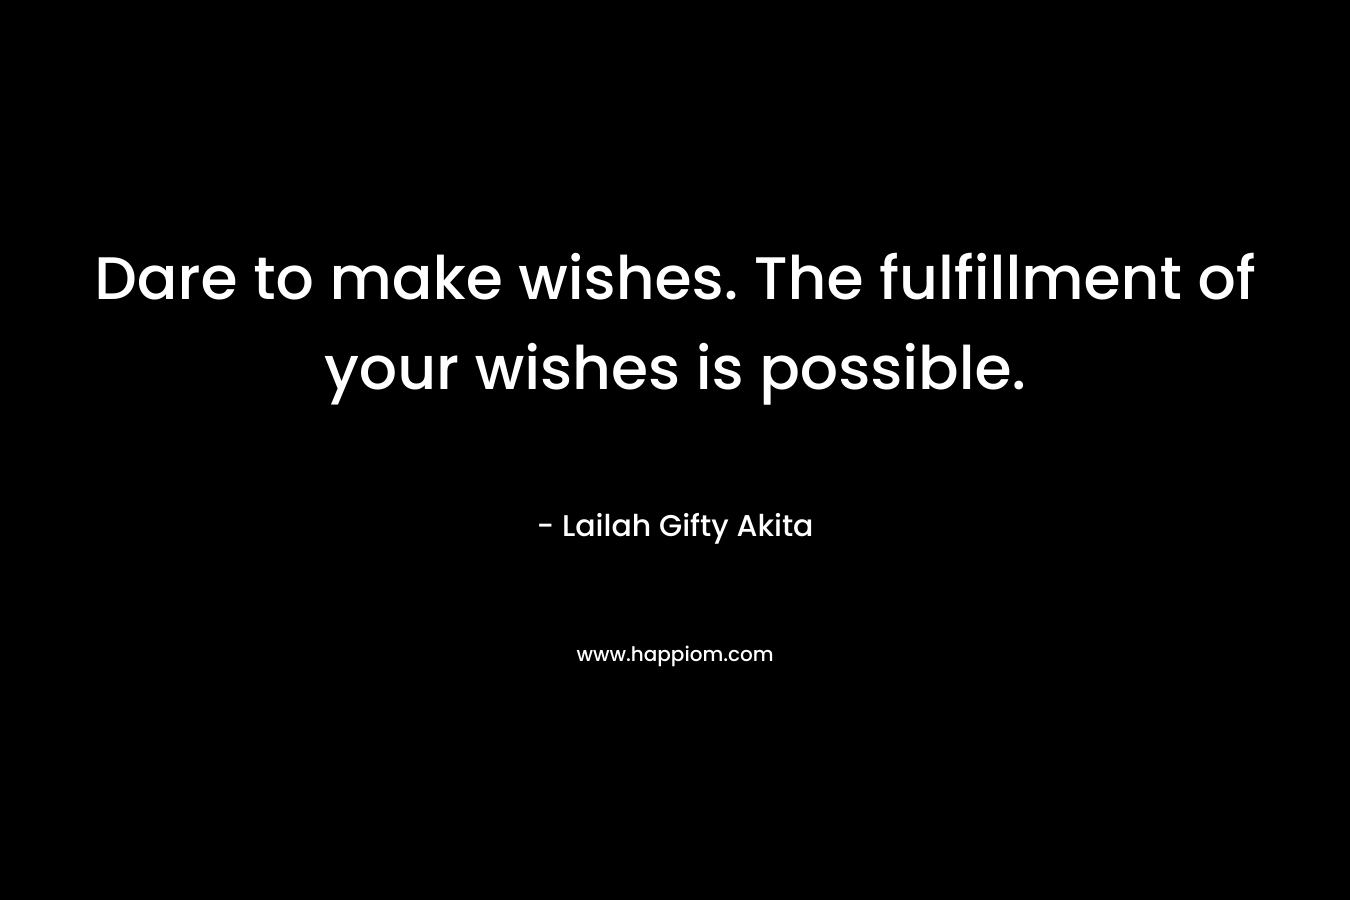 Dare to make wishes. The fulfillment of your wishes is possible.